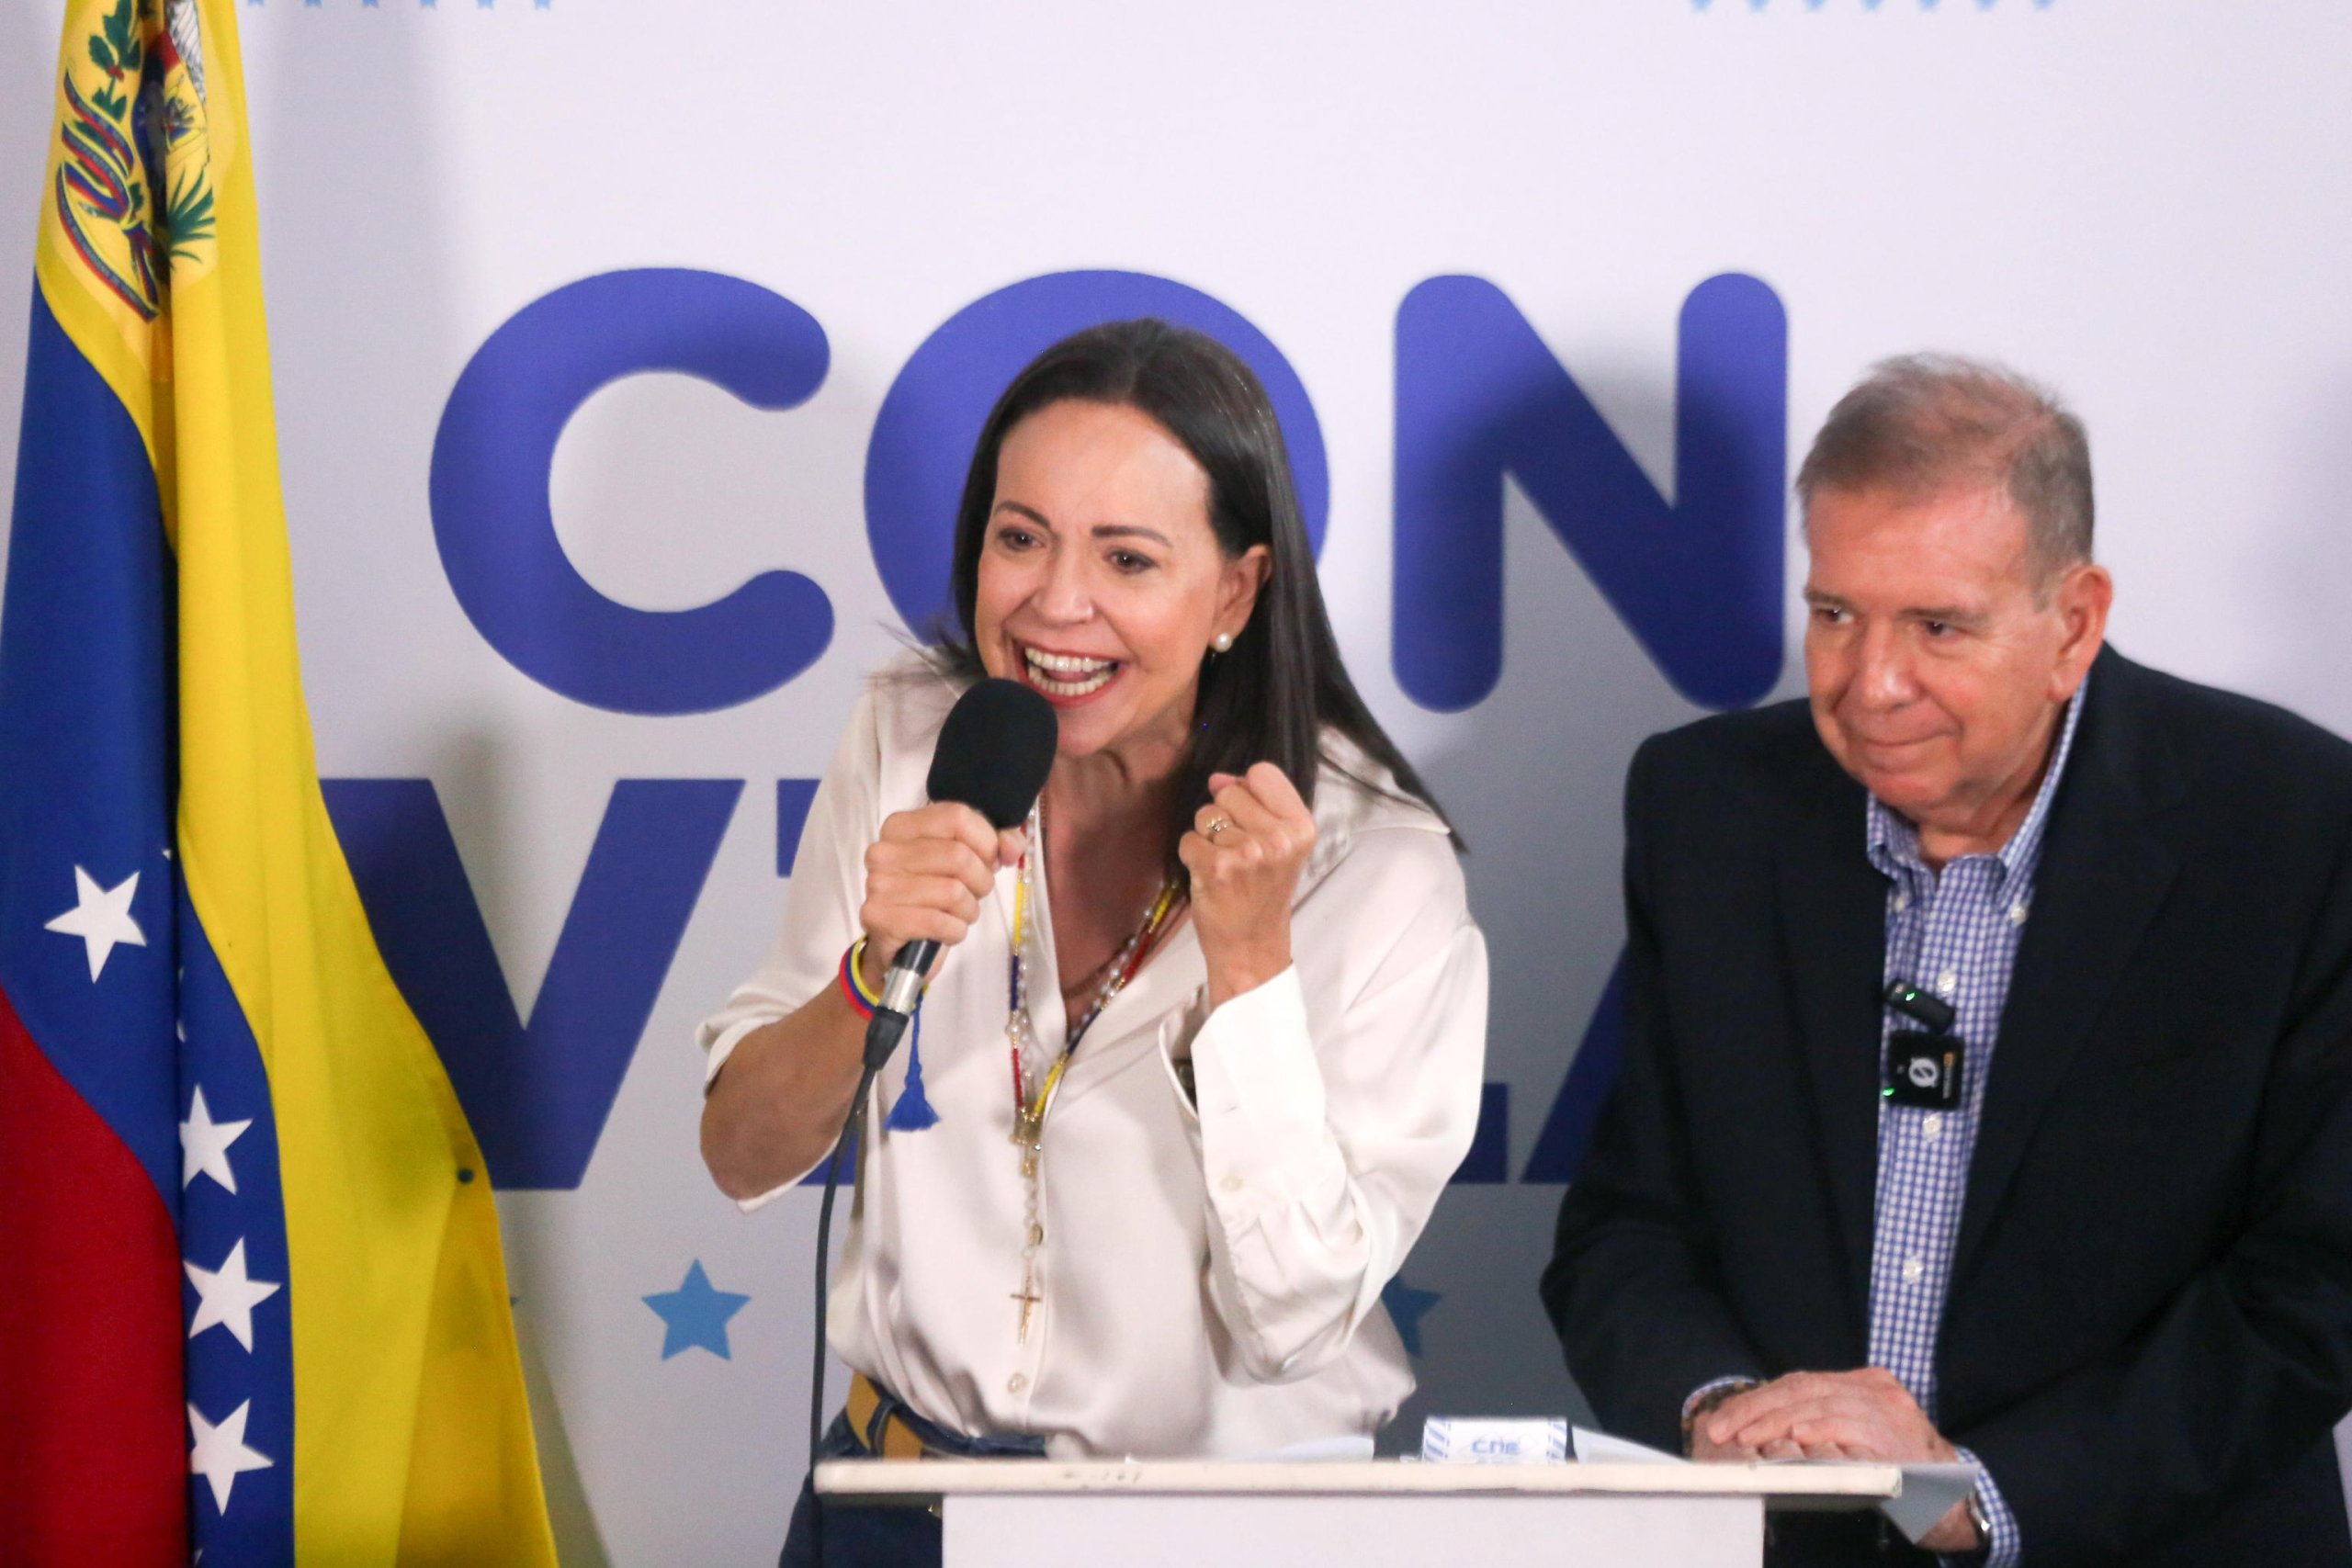 epa11507672 Opposition leader Maria Corina Machado (L) speaks during a press conference with the Presidential candidate to the Venezuelan elections Edmundo Gonzalez Urrutia (R) in Caracas, Venezuela, 29 July 2024. Machado said that the opposition obtained 73 % of the vote tallies, saying they can prove they won the presidential elections that took place on 28 July. The Venezuelan National Electoral Council (CNE) has proclaimed that Nicolas Maduro was re-elected president of Venezuela.  EPA/Manuel Diaz